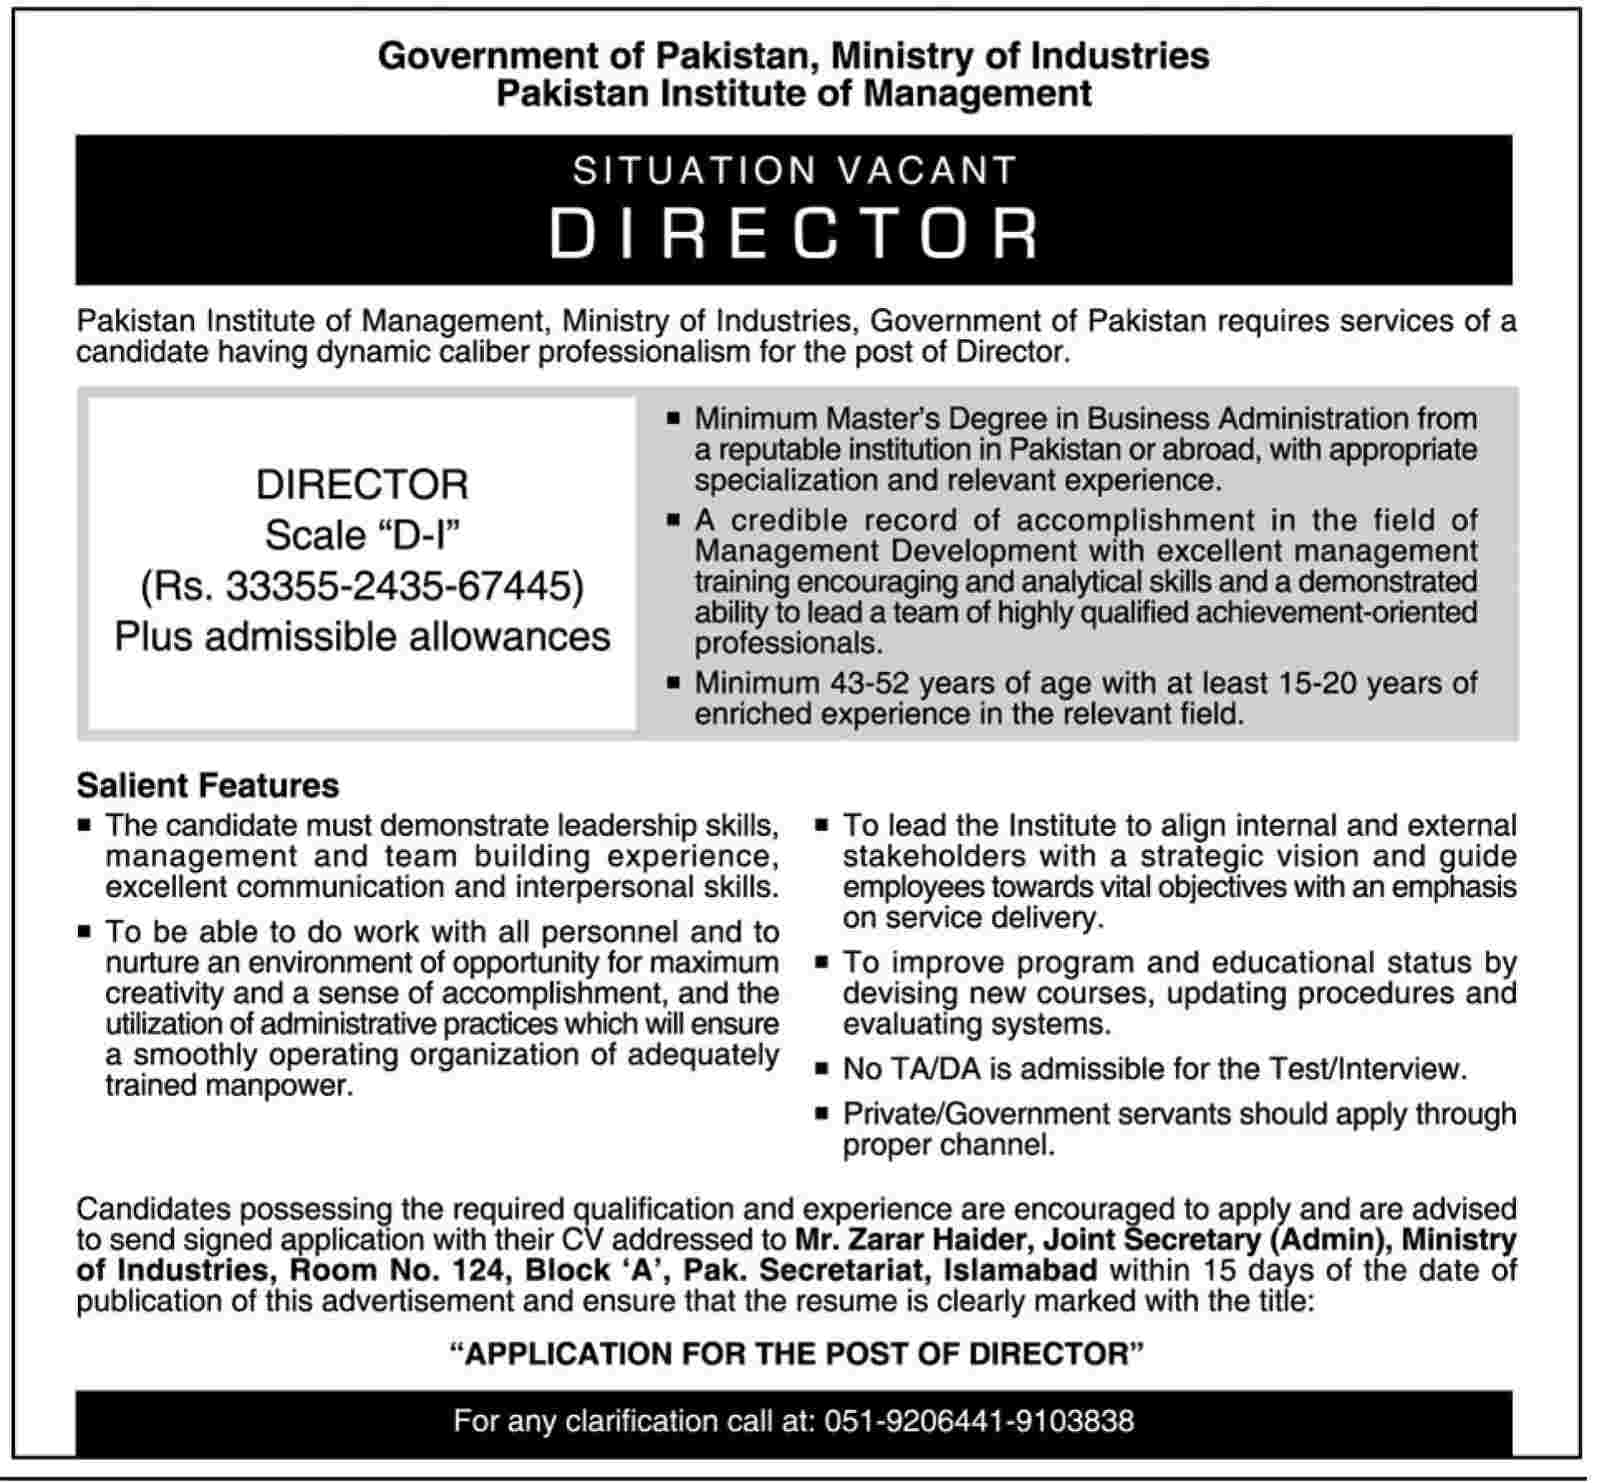 Pakistan Institute of Management Requires Director Under Ministry of Industries Government of Pakistan (Government Job)